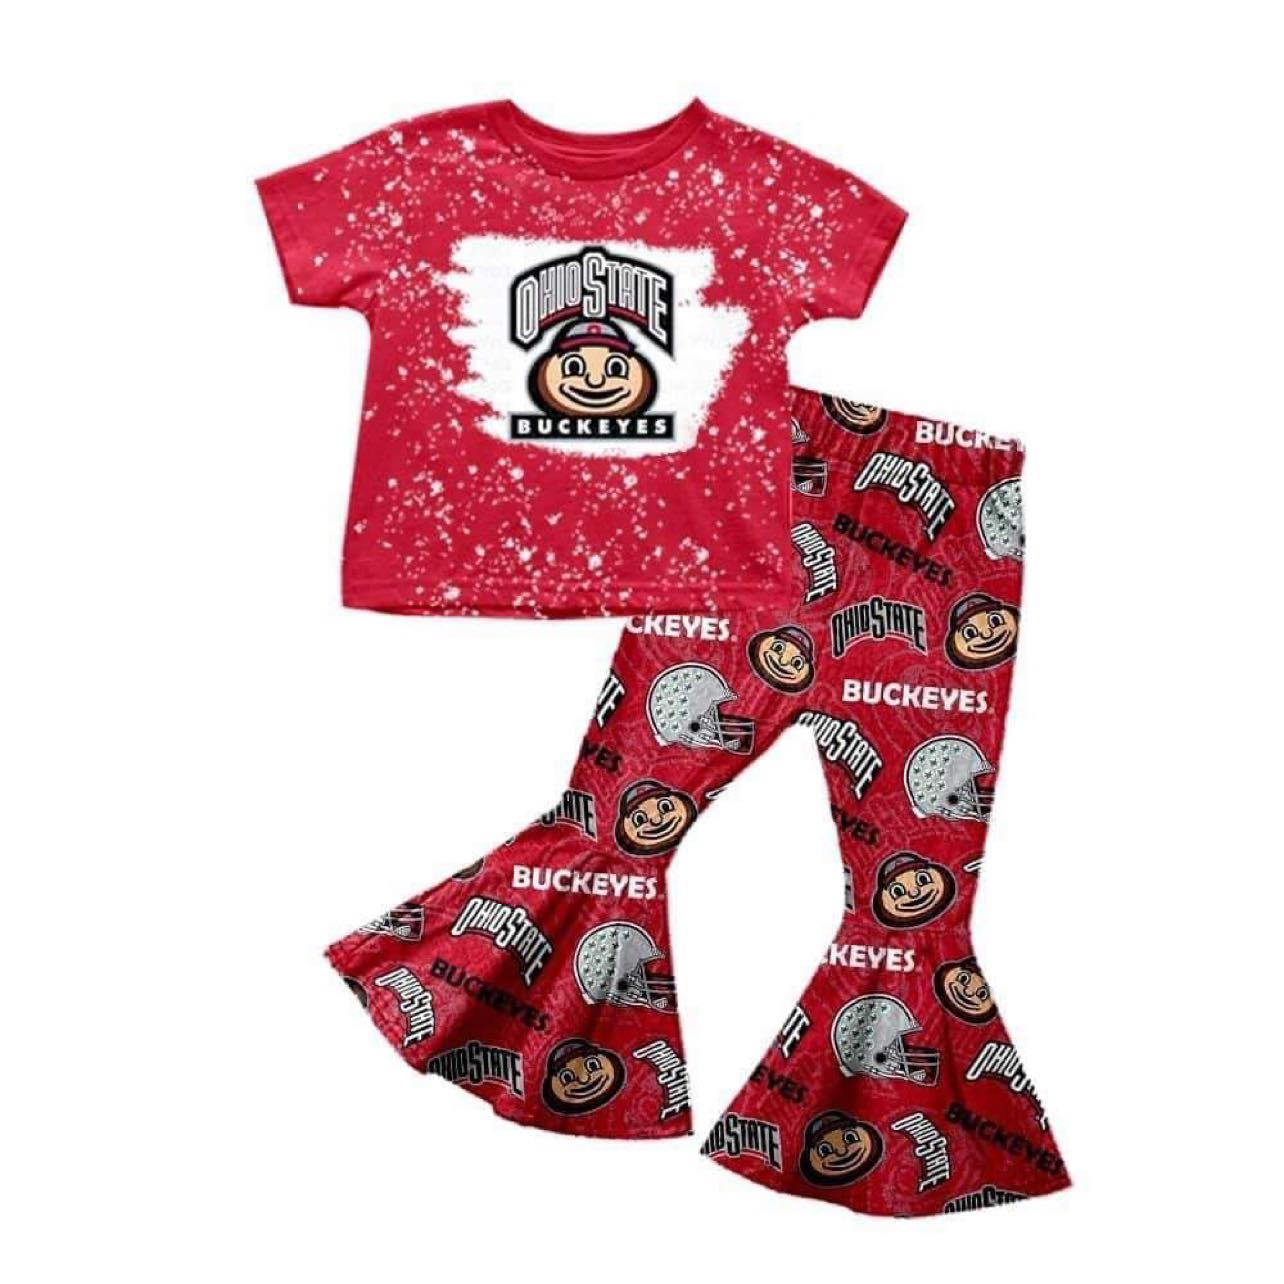 Baby girls football team OH pants clothes